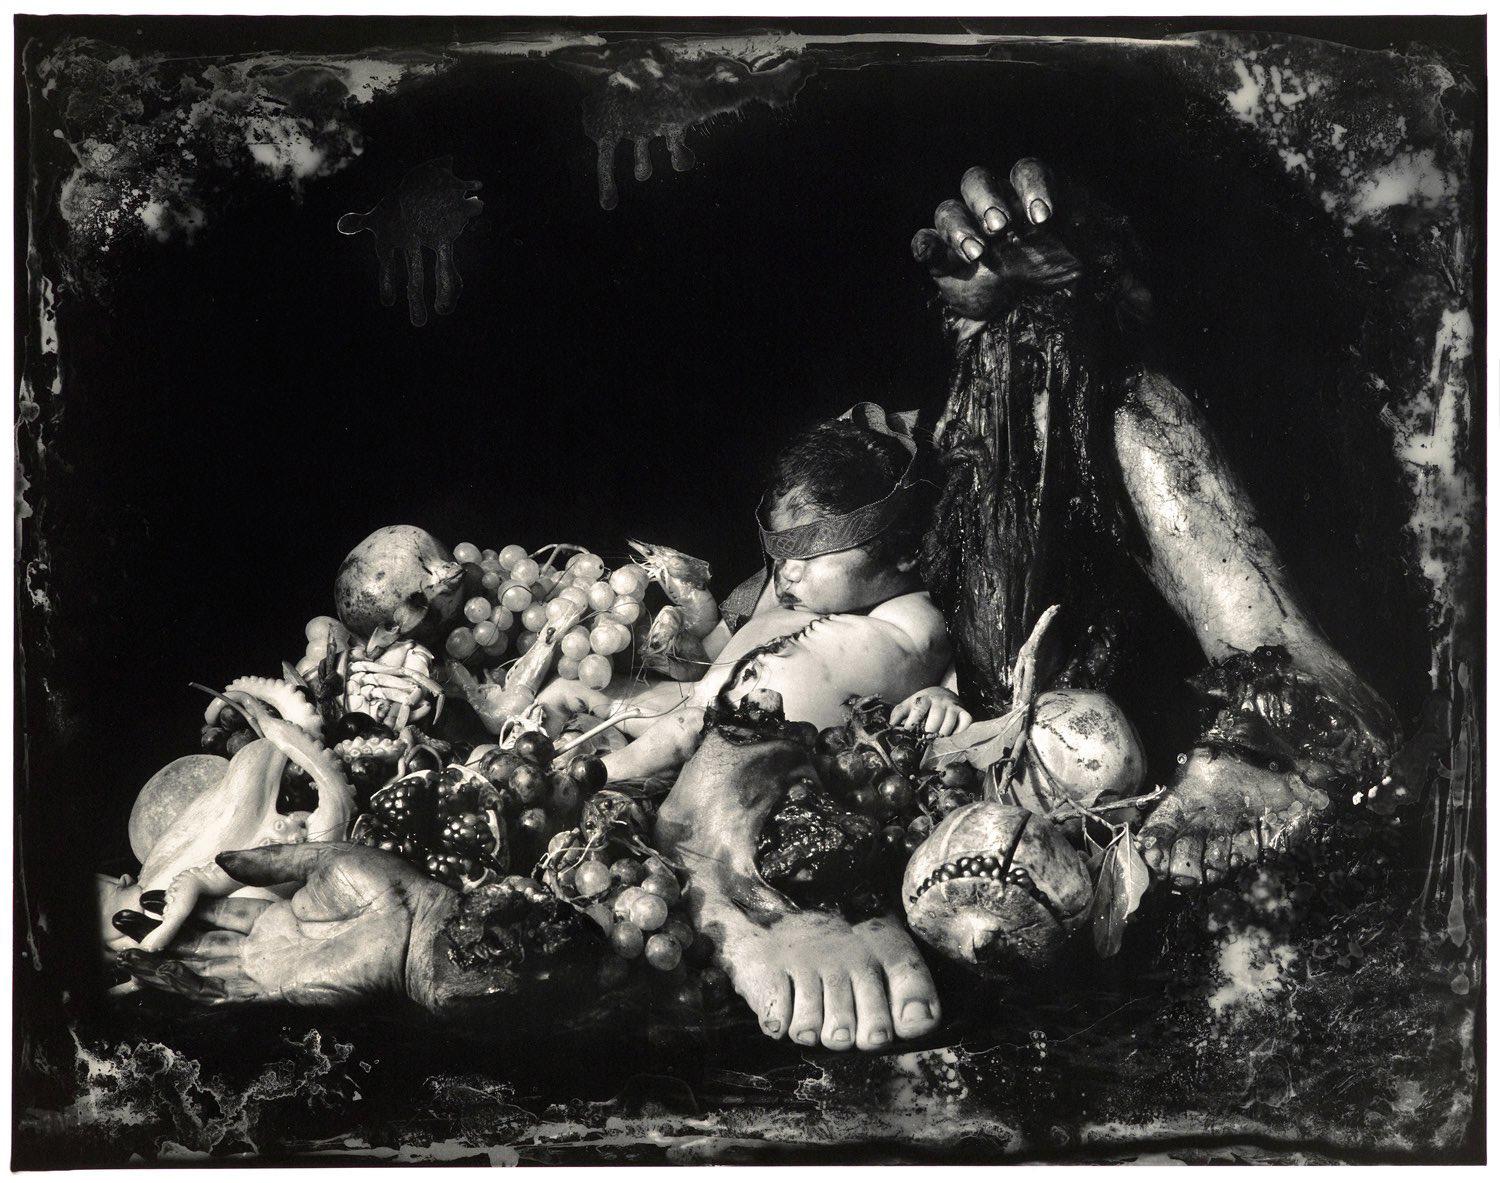 Feast of Fools - Photograph by Joel-Peter Witkin